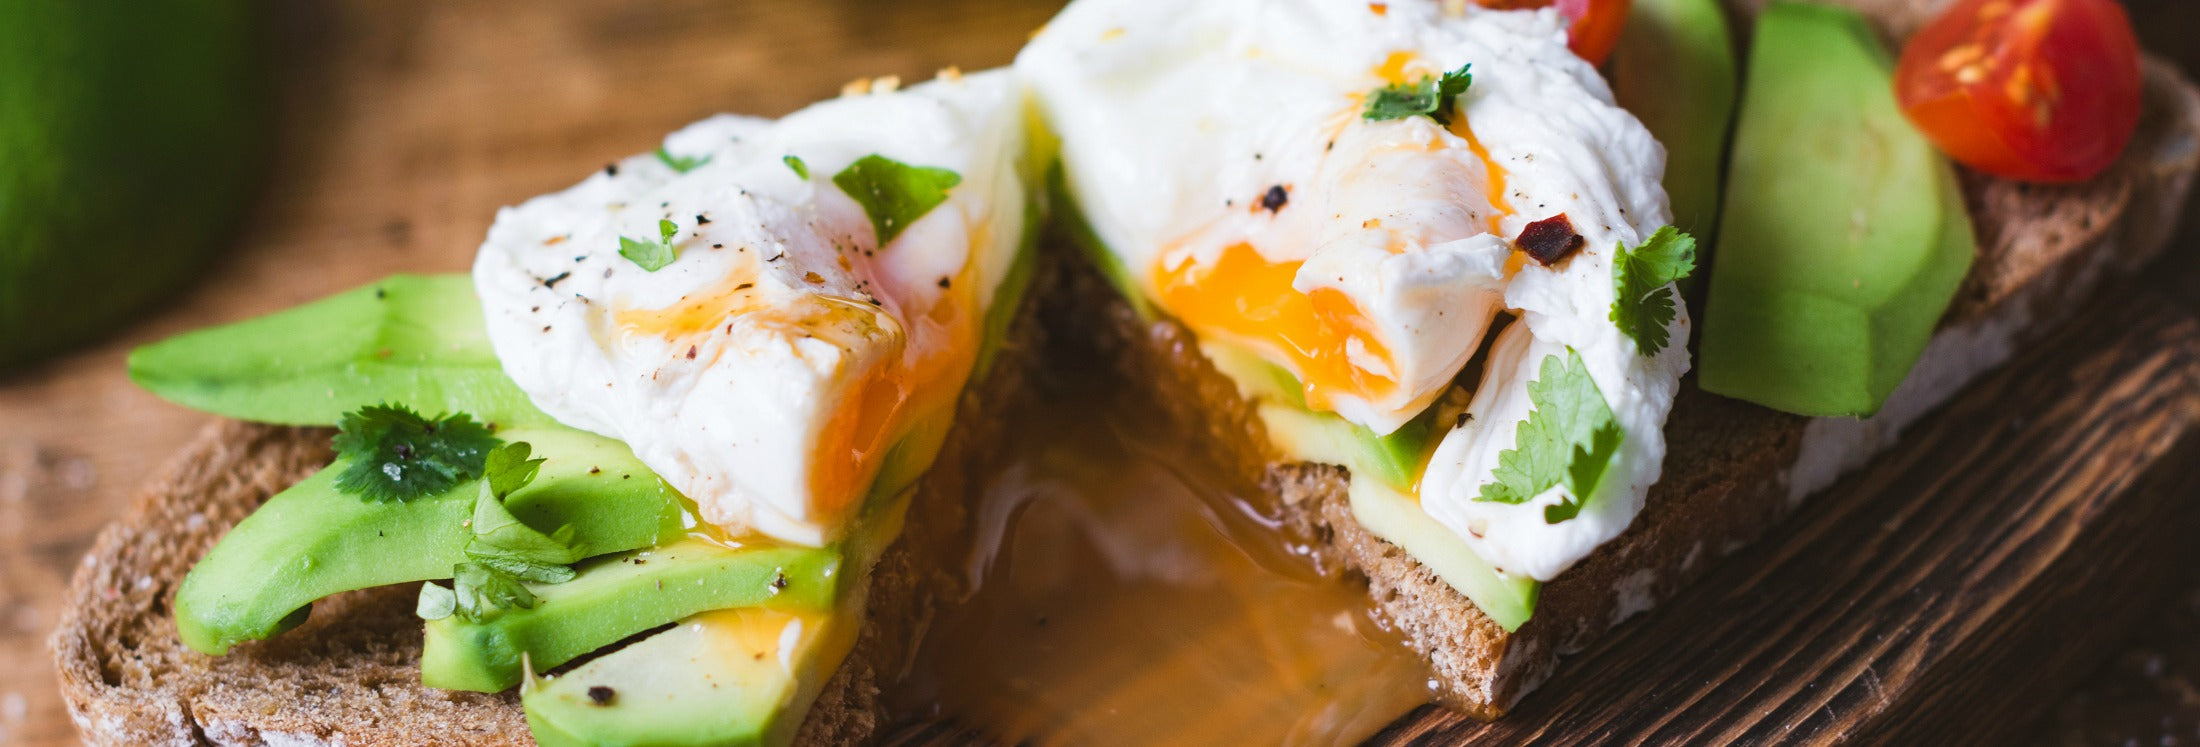 Fire Up Your Breakfast with Low-Cal, High Protein Dishes